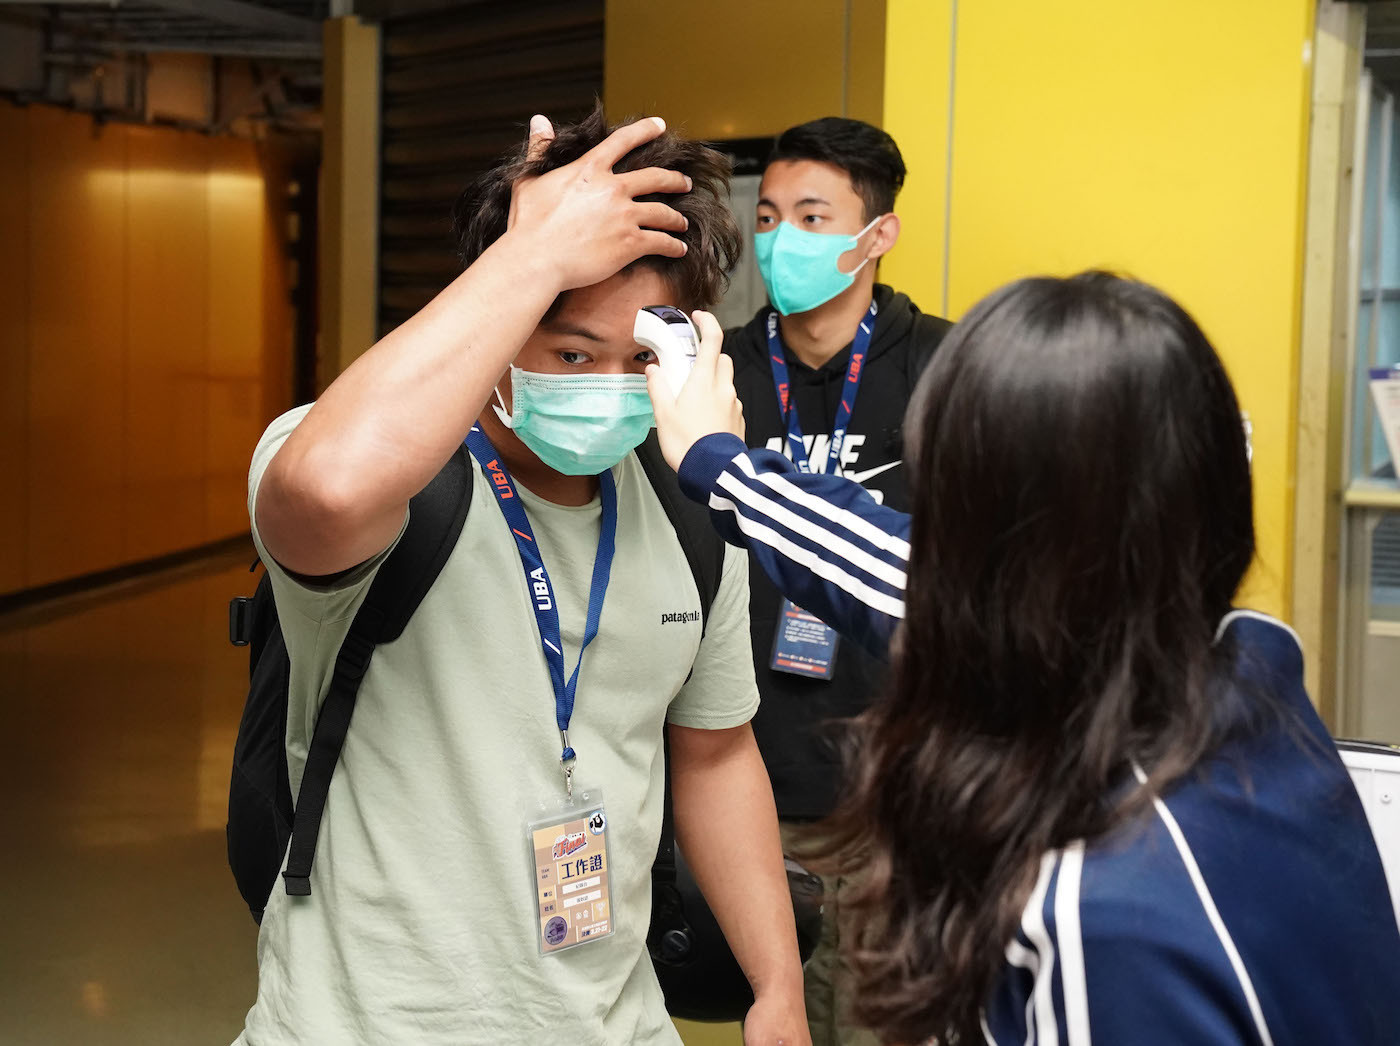 The CTUSF has implemented measures at its events amid the coronavirus pandemic ©CTUSF